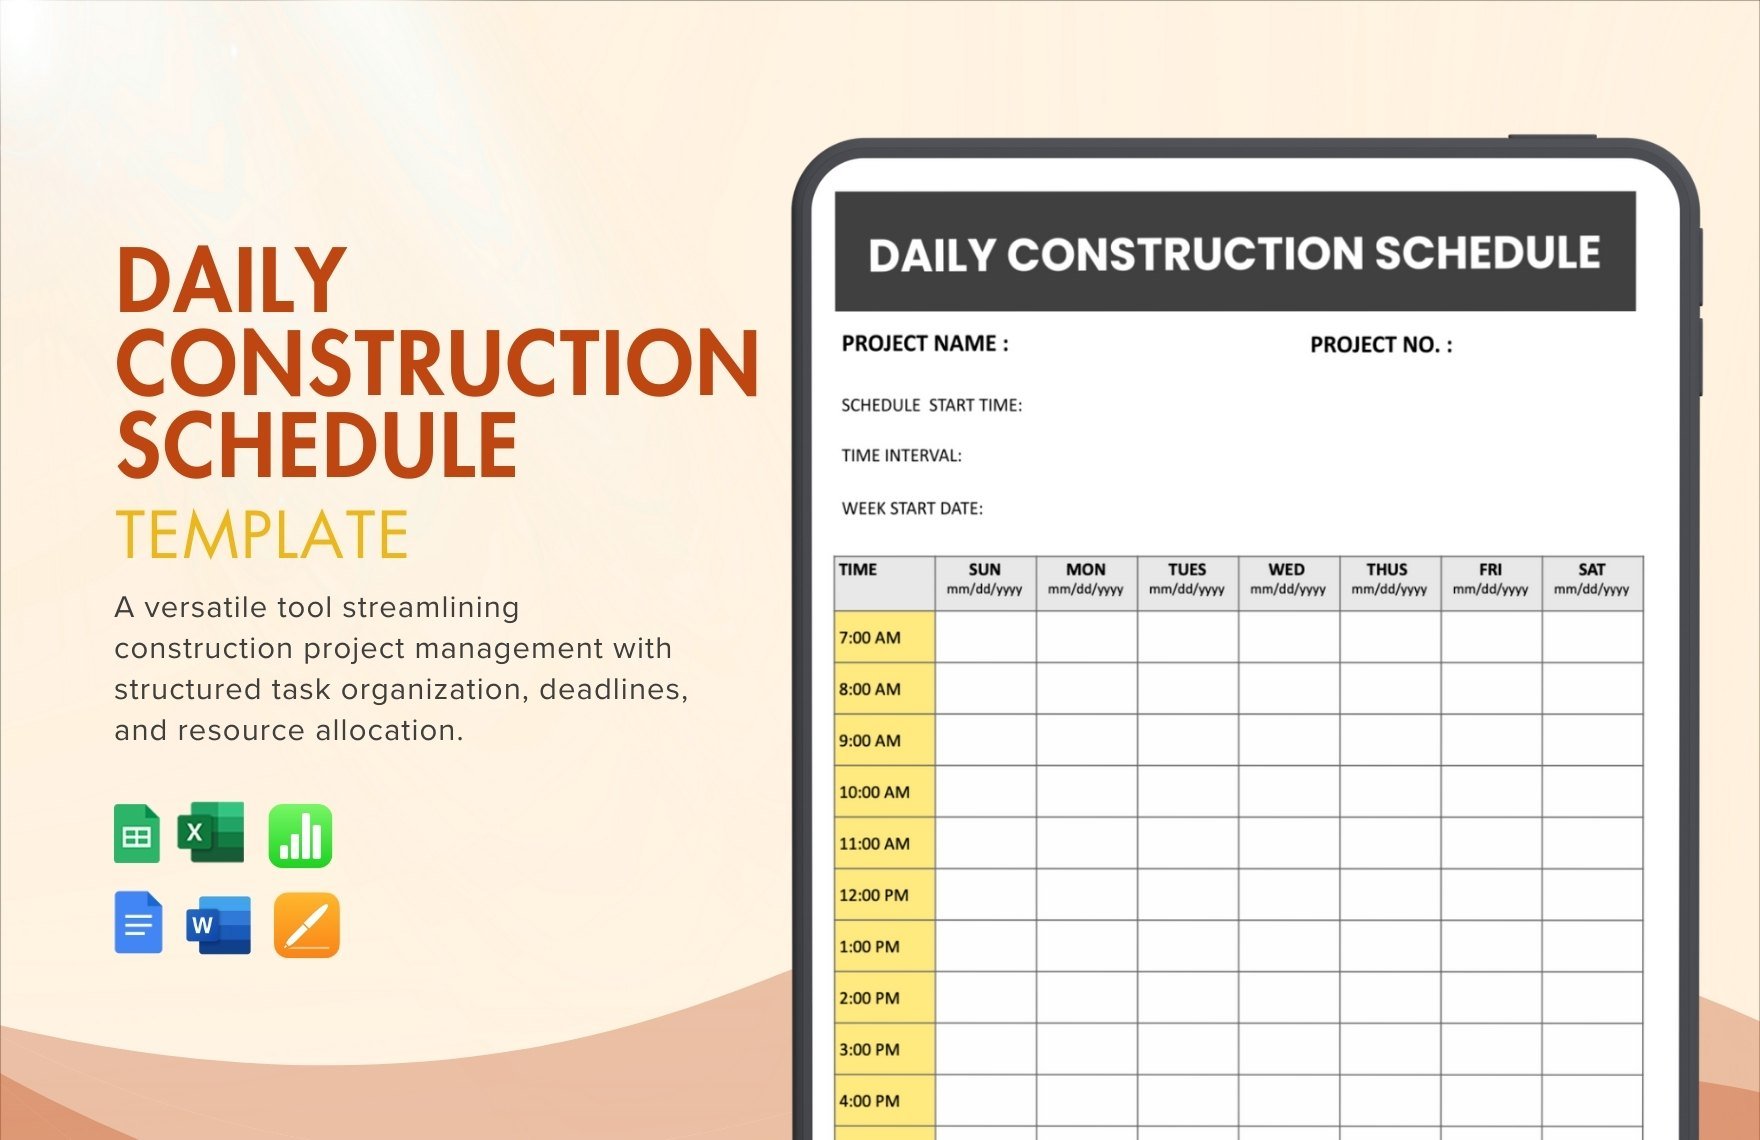 Daily Construction Schedule Template